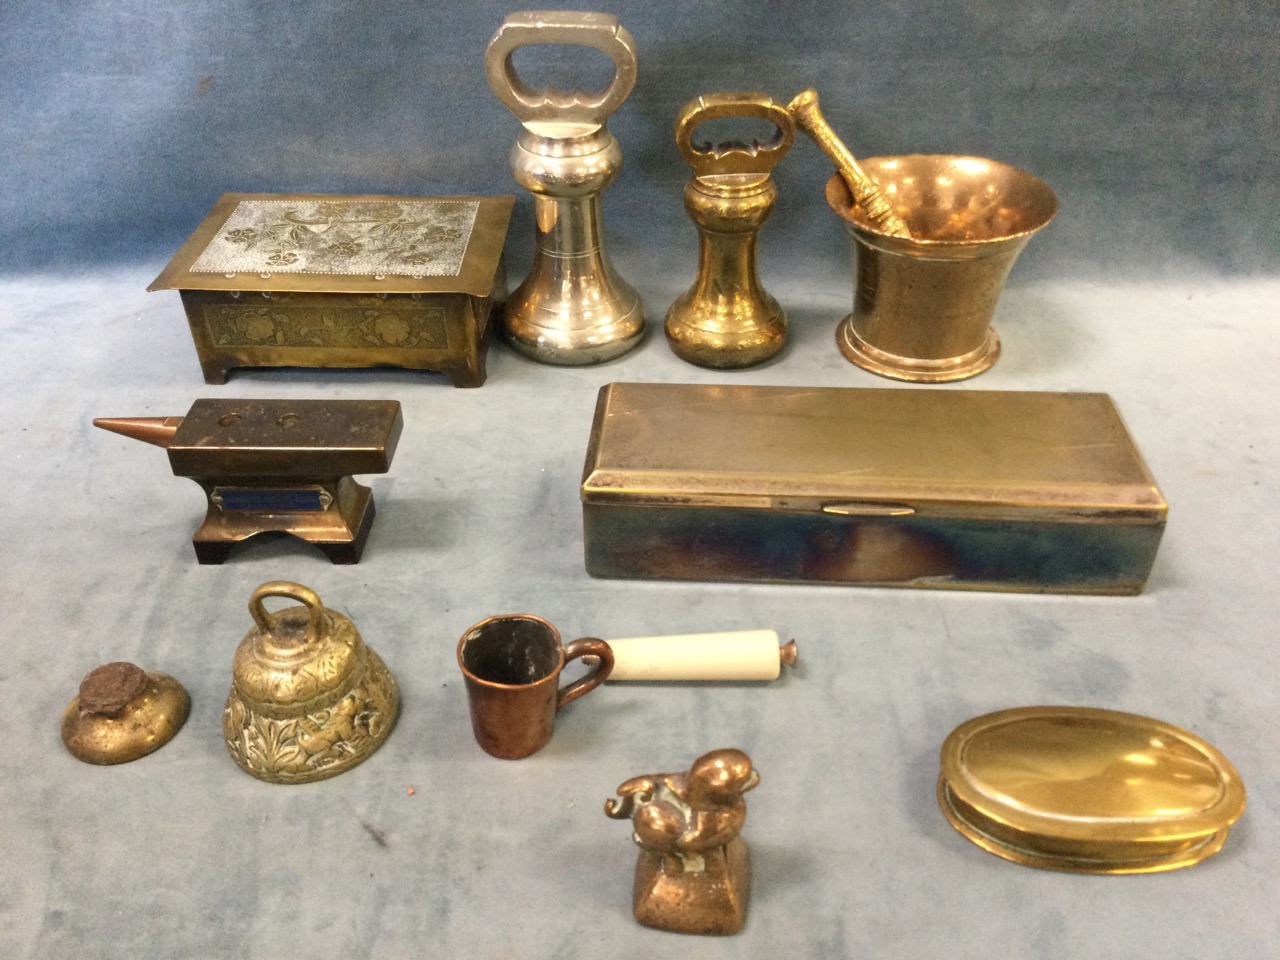 Miscellaneous brass - cigarette boxes, candle snuffers and trays, an anvil, pestle and mortar, - Image 3 of 3